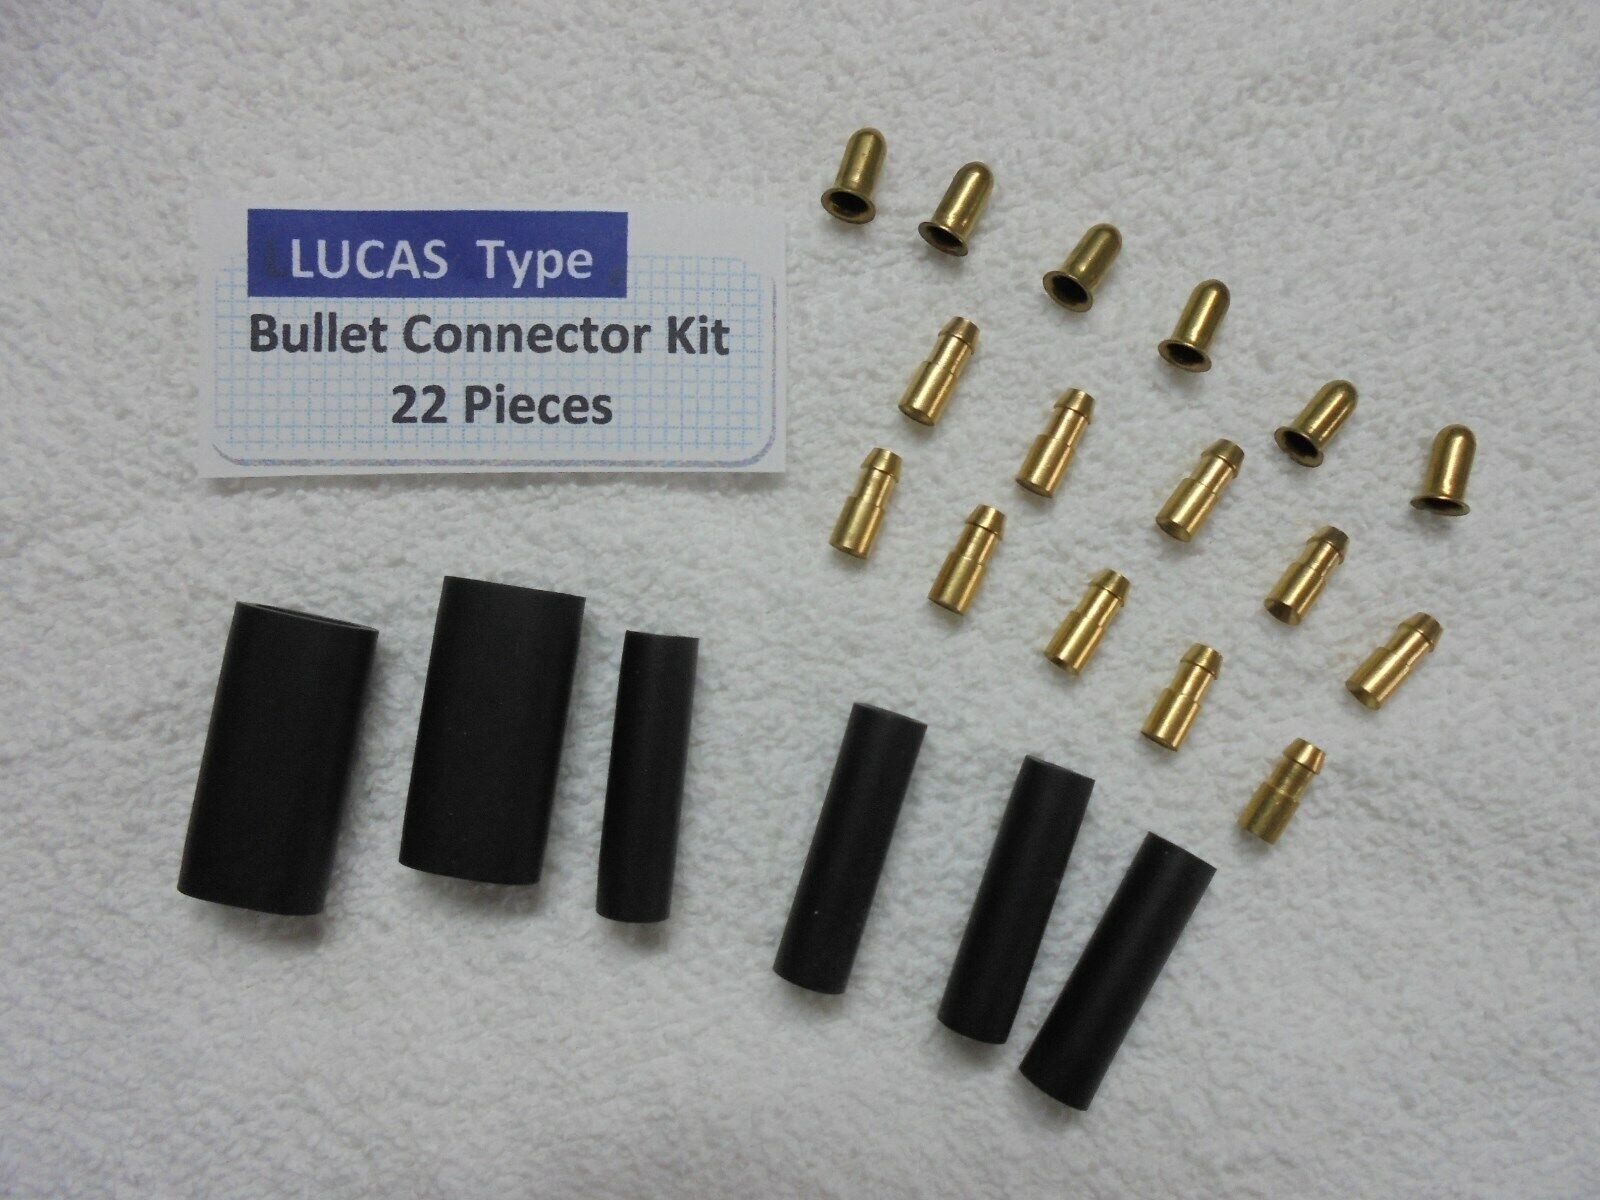 Lucas Type 4.7 mm Electrical Bullet Connector Pack- 22 Pieces